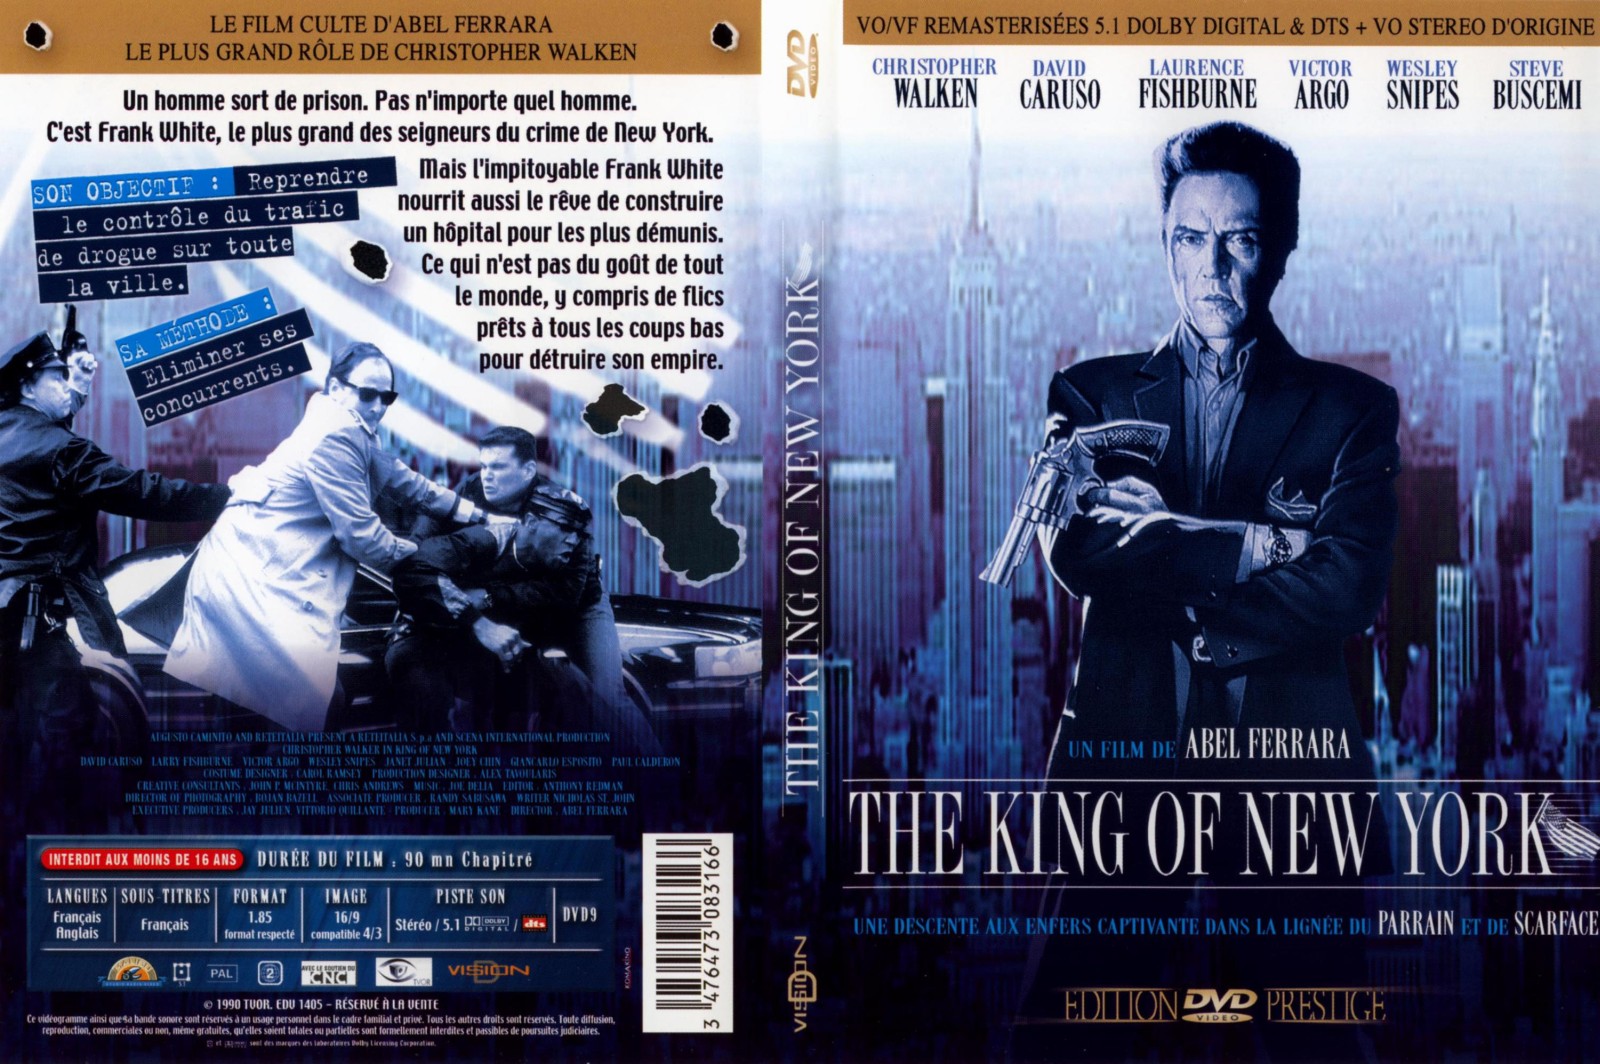 Jaquette DVD The king of new york